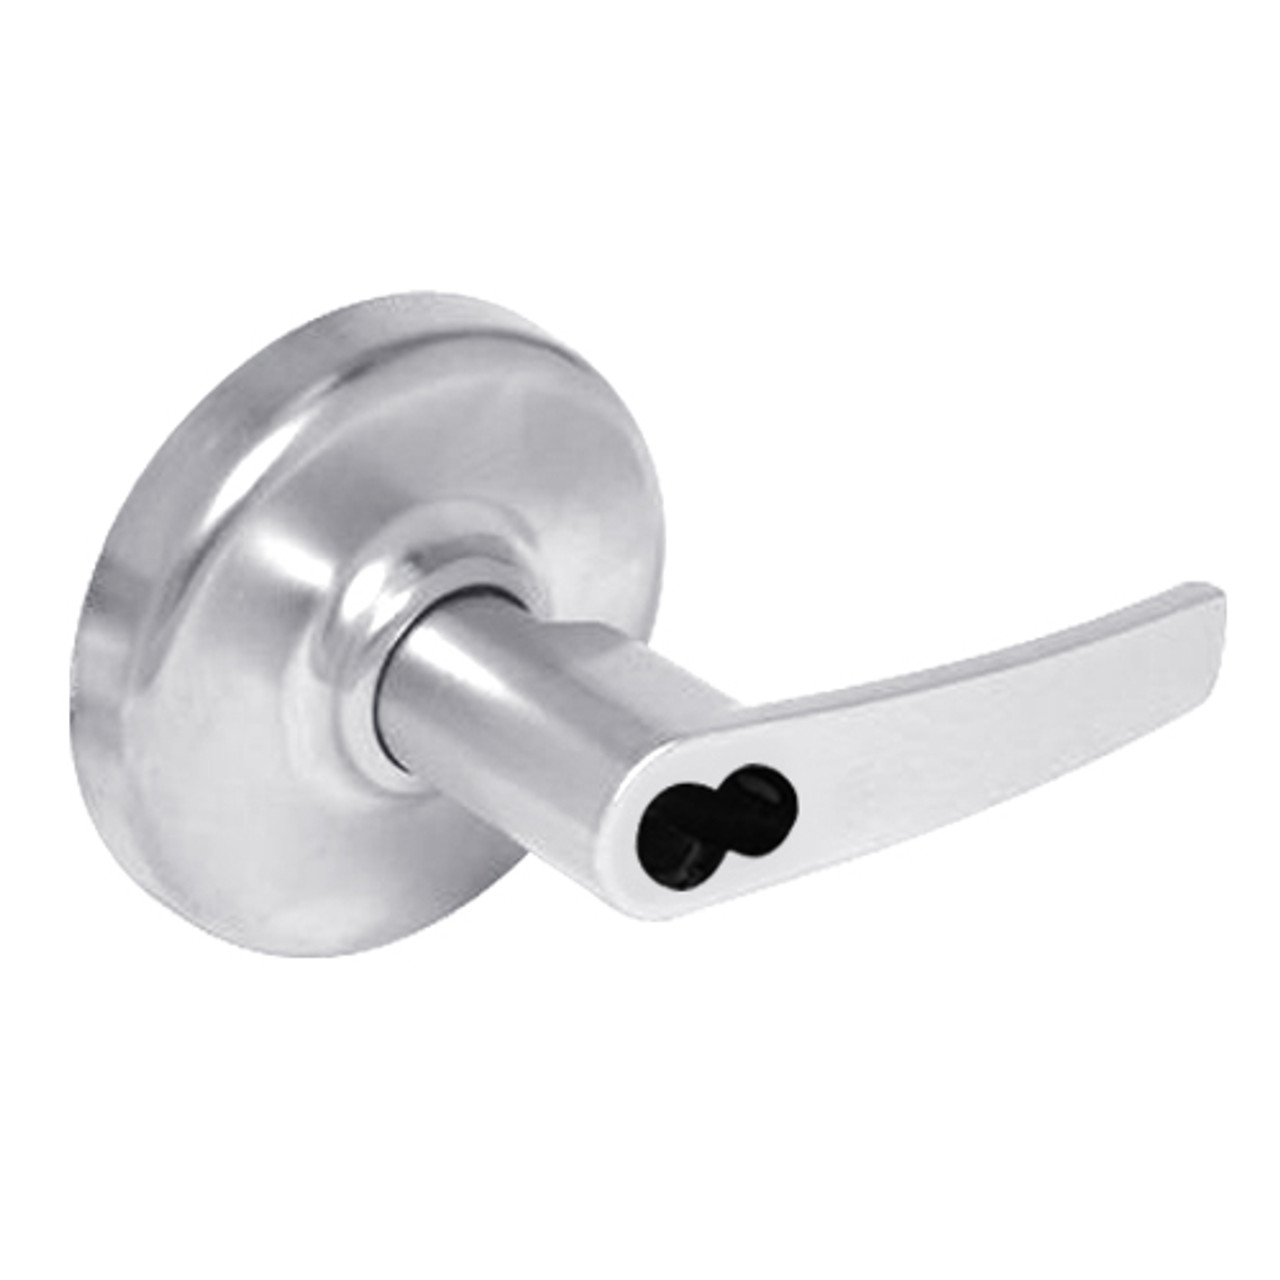 CL3361-AZD-625-CL6 Corbin CL3300 Series IC 6-Pin Less Core Extra Heavy Duty Entry or Office Cylindrical Locksets with Armstrong Lever in Bright Chrome Finish